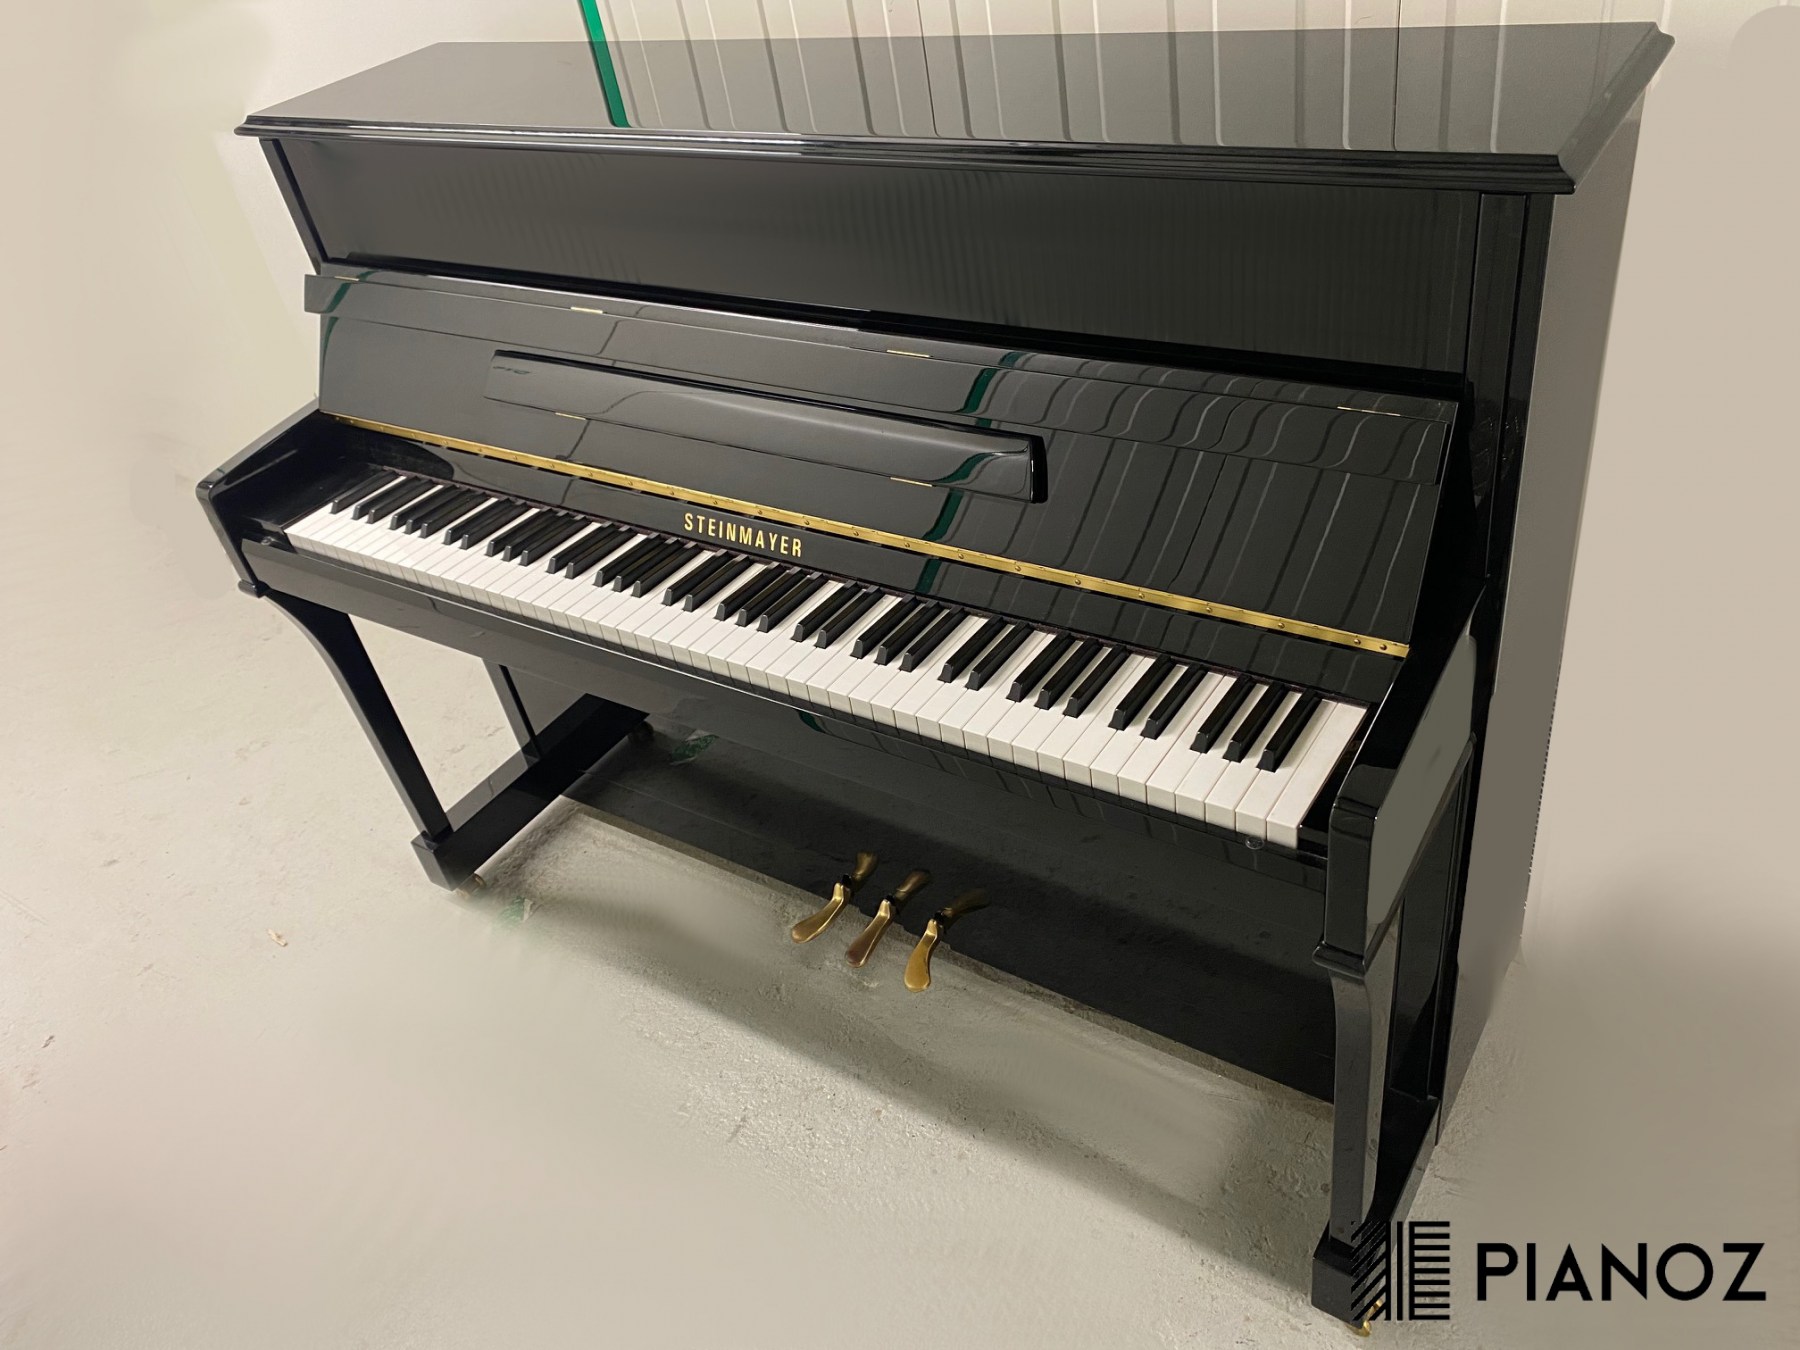 Steinmayer 110 Black High Gloss Upright Piano piano for sale in UK